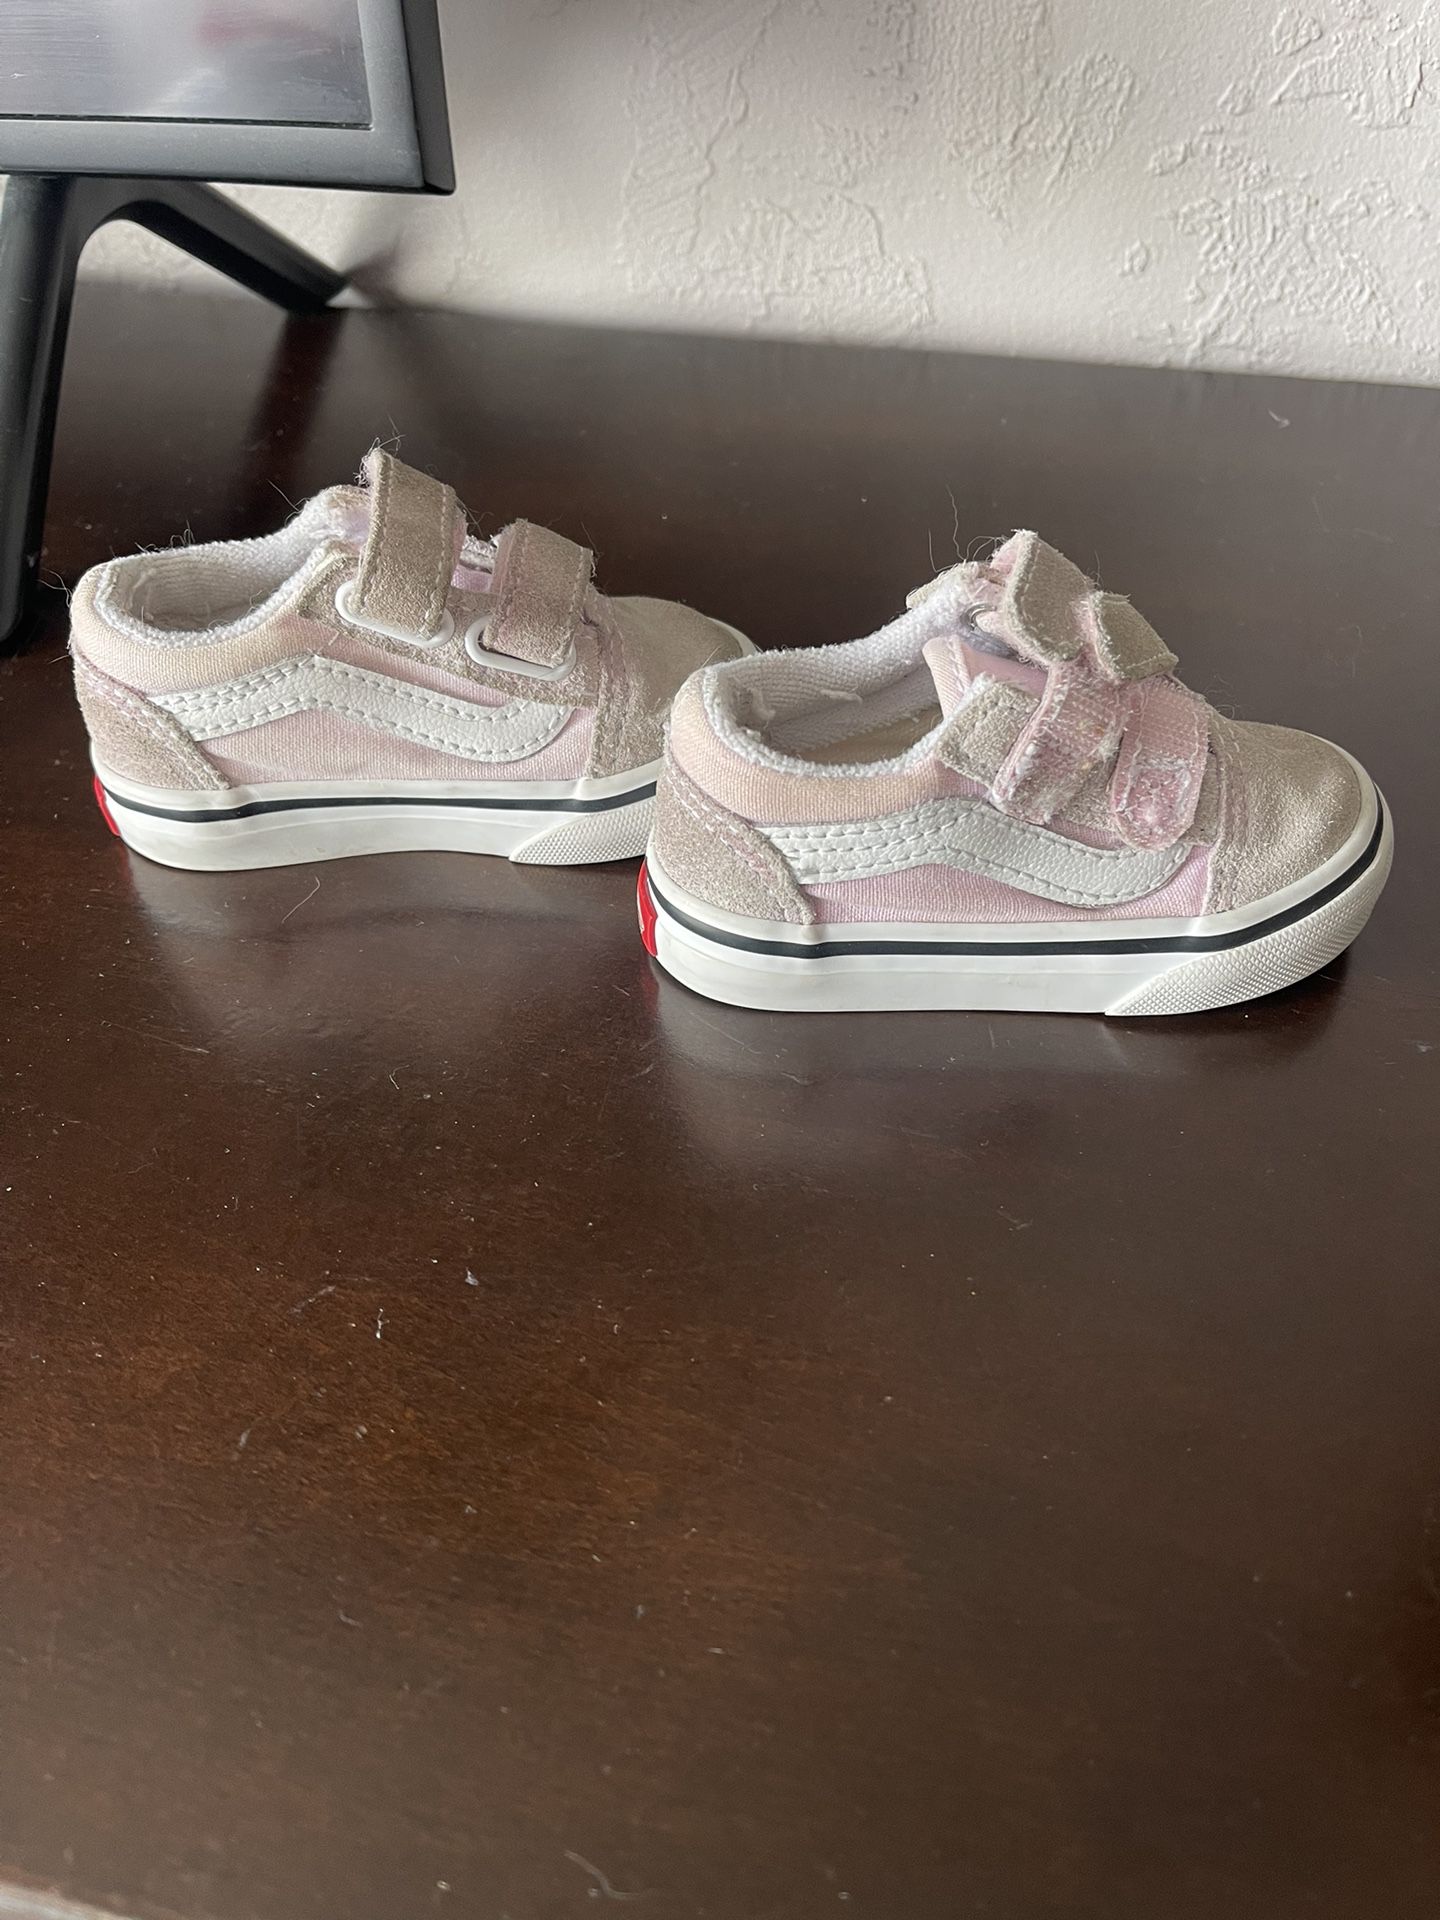 Toddlers Shoes Bundle $10 Each Or Less